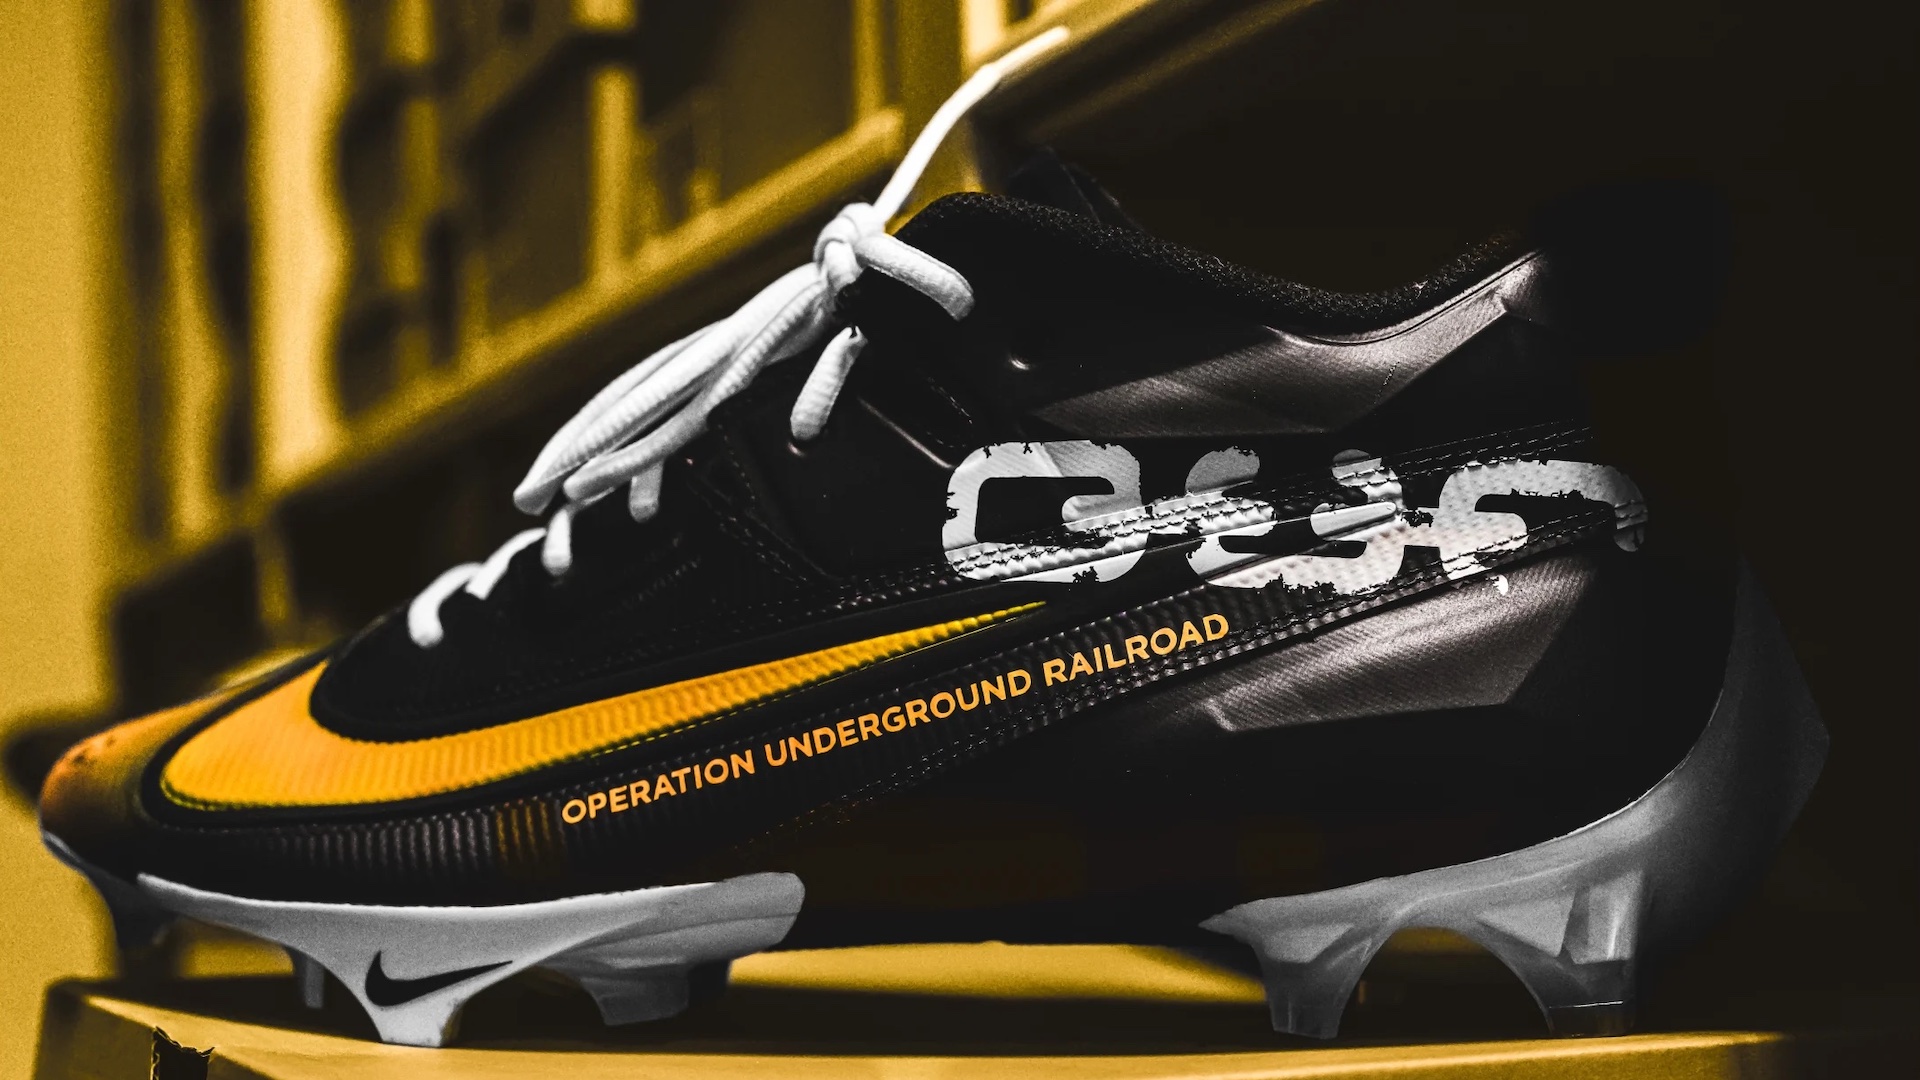 Nick Bawden's cleats advertising Operation Underground Railroad